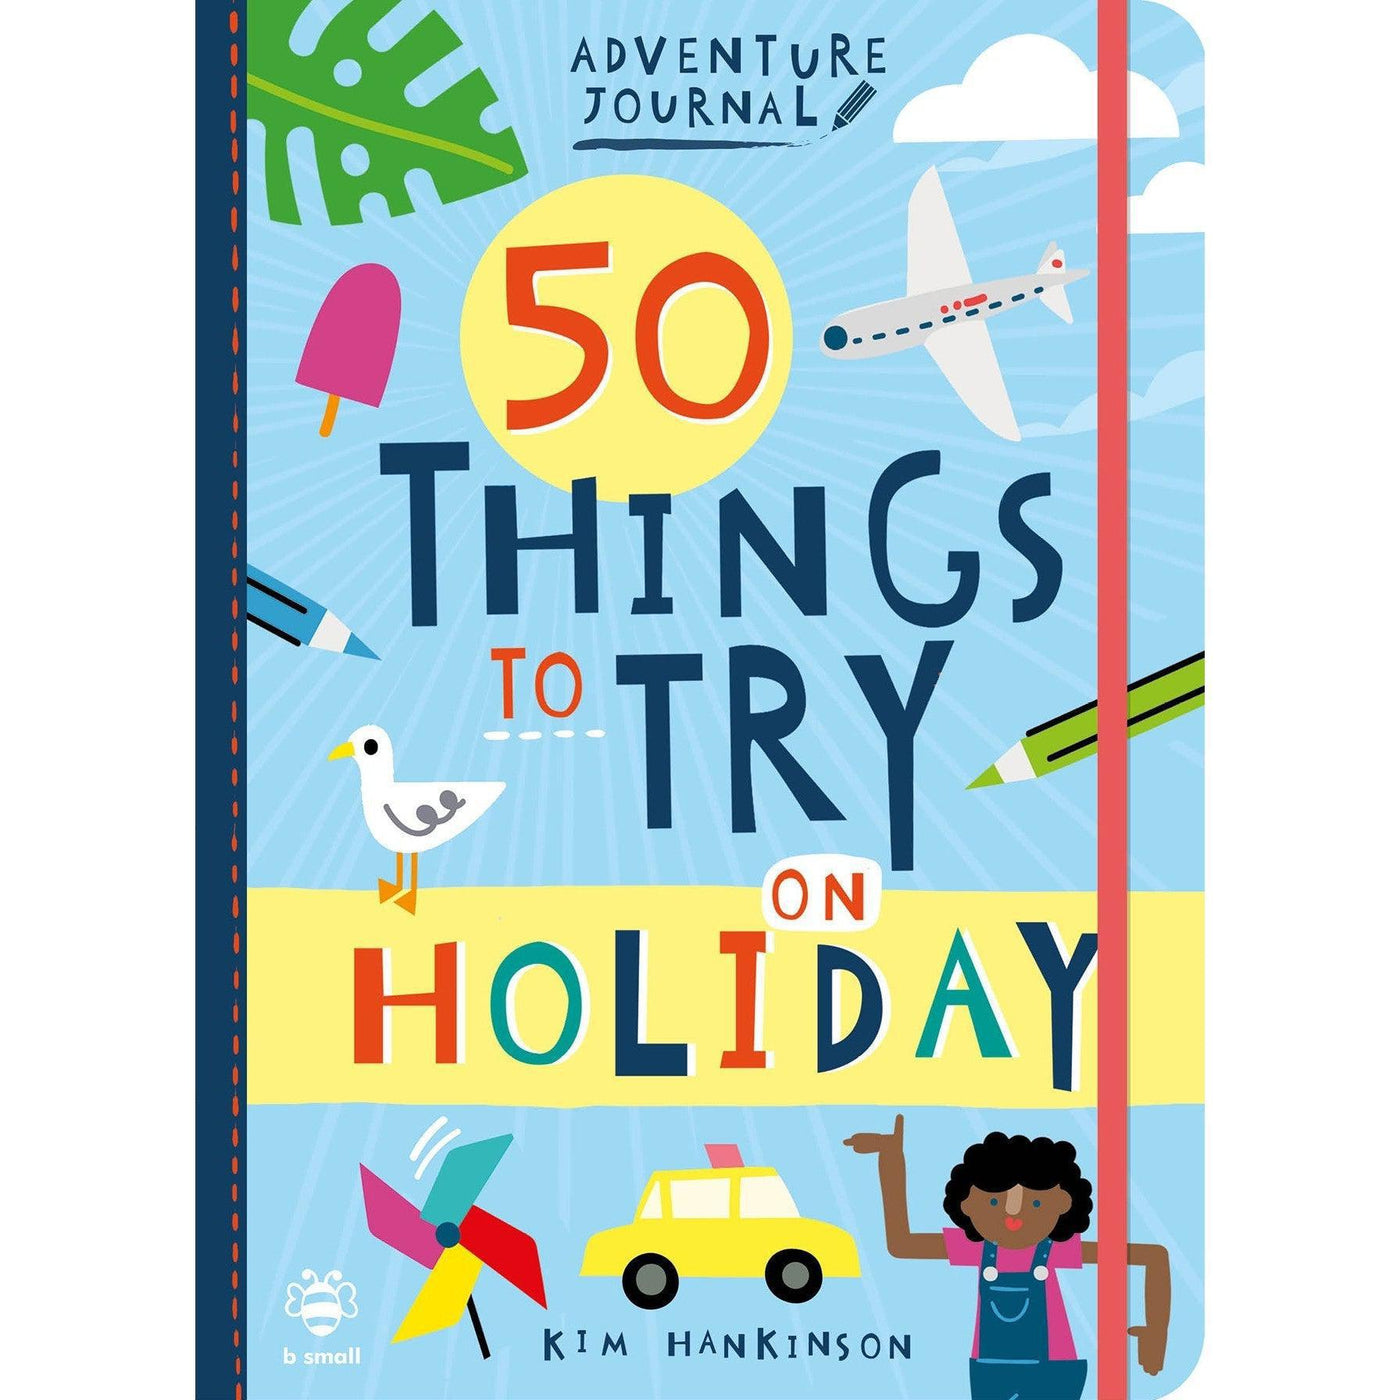 50 Things To Try On Holiday Adventure Journal - Kim Hankinson